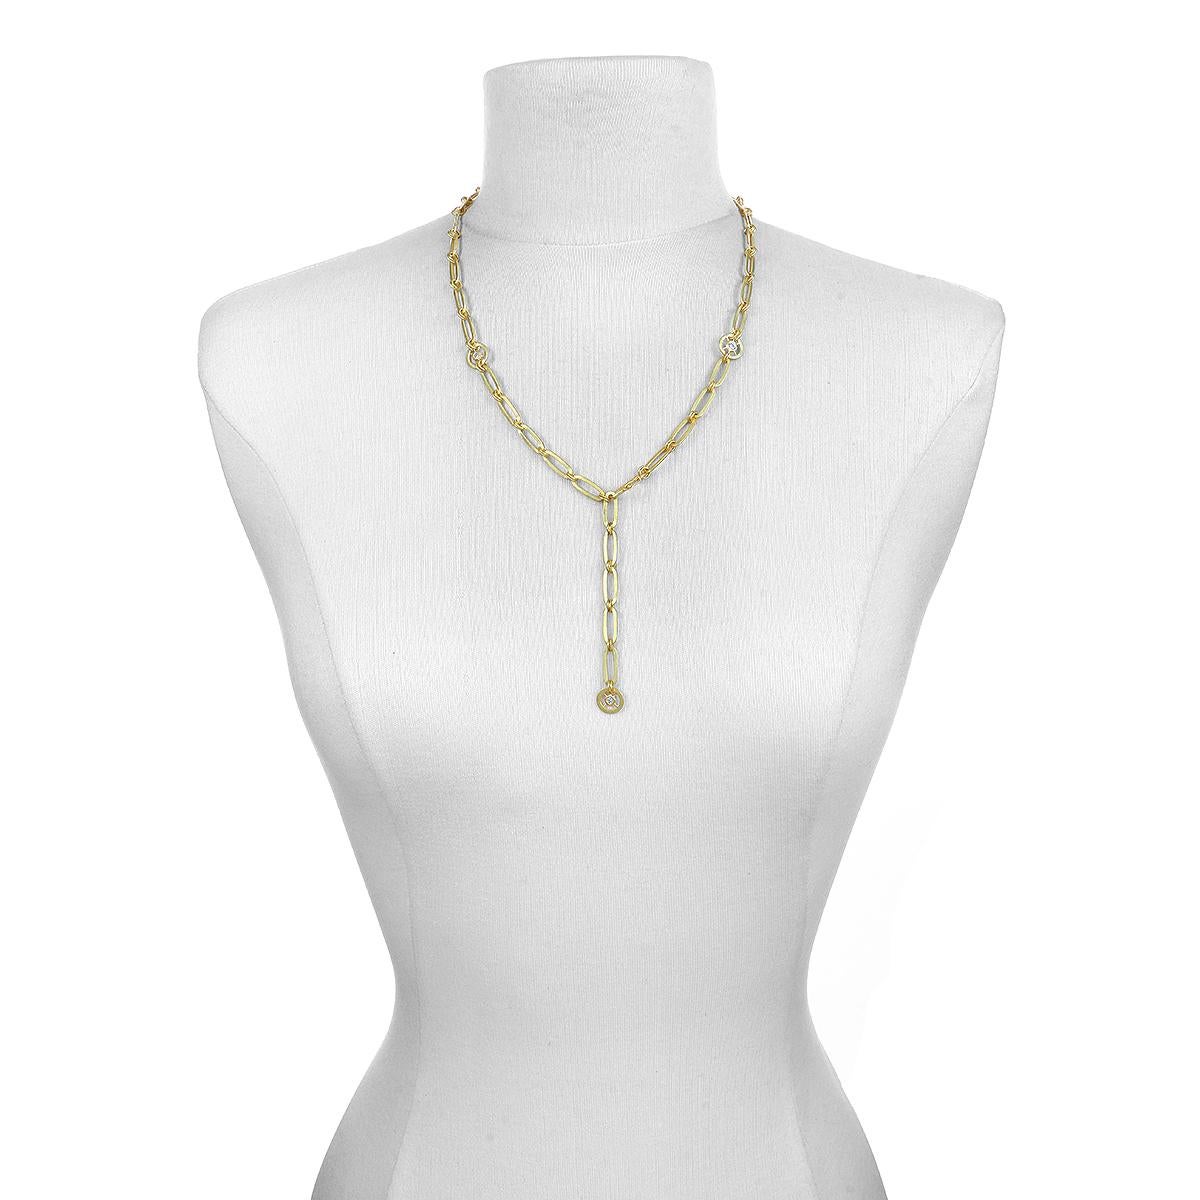 Faye Kim 18 Karat Gold and Diamond Wheel Paperclip Lariat Necklace

Experience everyday luxury in Faye Kim's handcrafted 18k gold and diamond Paperclip necklace. This iconic chain is given a modern twist in a lariat style with diamond pinwheels and